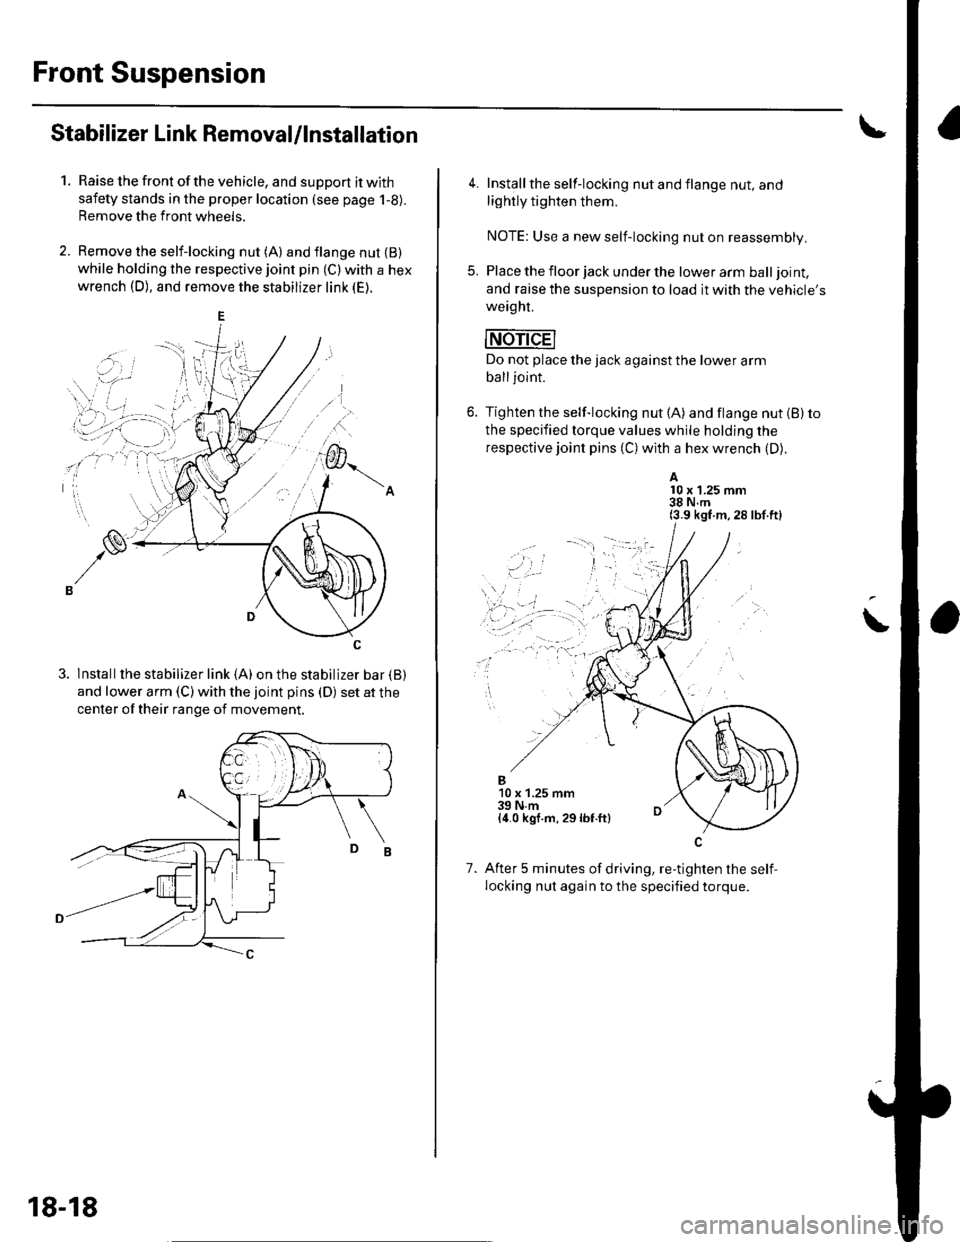 HONDA CIVIC 2003 7.G User Guide Front Suspension
Stabilizer Link Removal/lnstallation
1.Raise the front of the vehicle, and support it with
safety stands in the proper location (see page 1-8).
Remove the front wheels.
Remove the sel